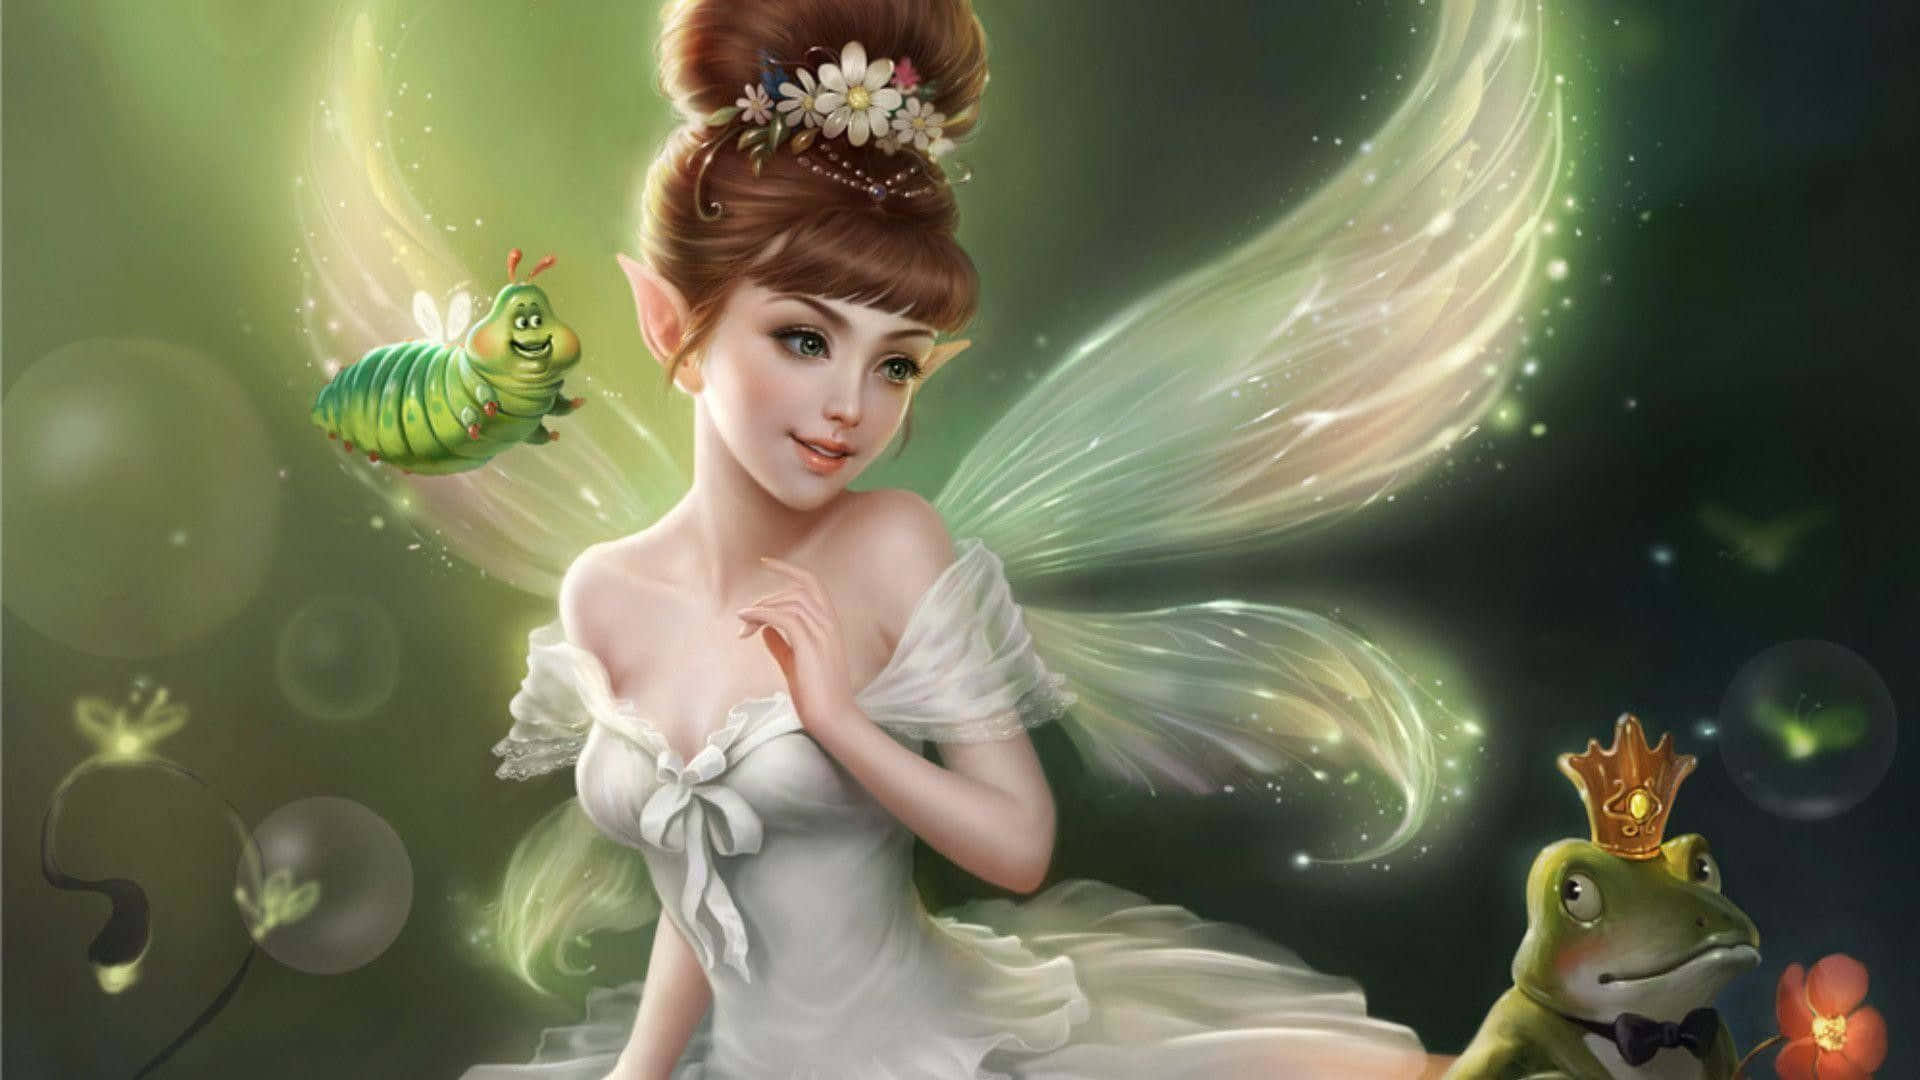 From the dreams of fairies come stories of fantasy and adventure